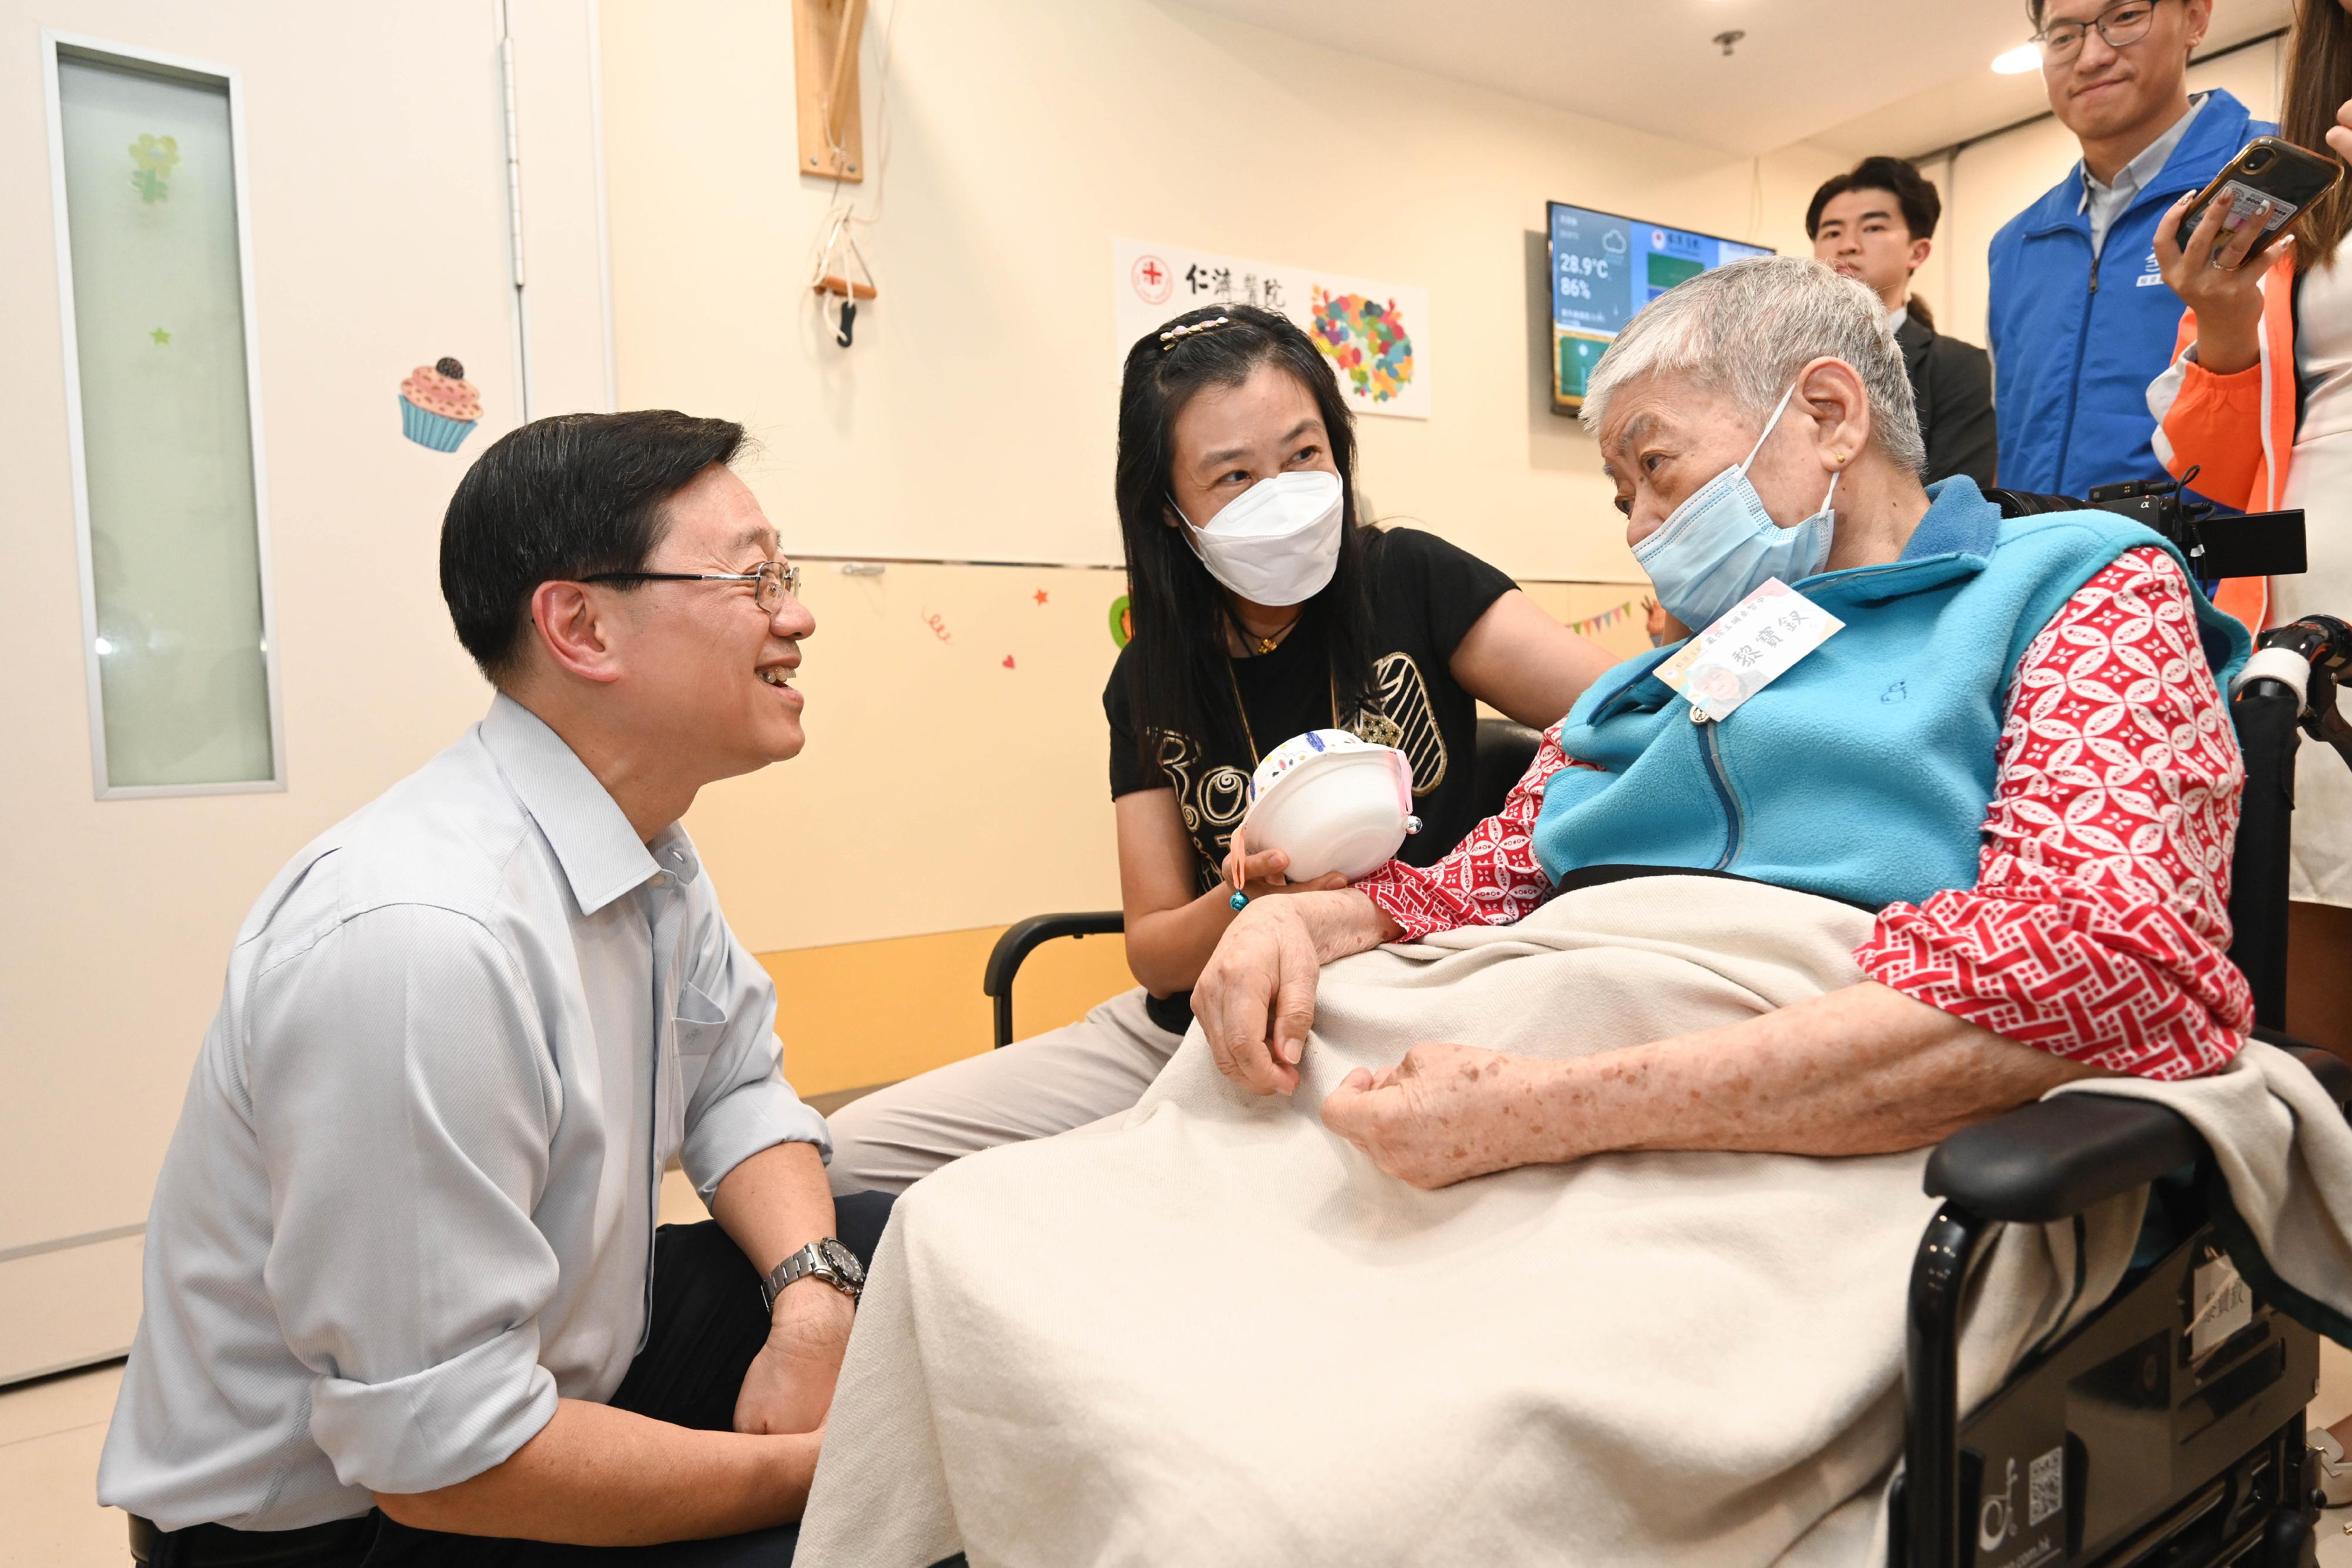 The Chief Executive, Mr John Lee, visited Tsuen Wan to gather public views on the upcoming Policy Address today (September 15). Photo shows Mr Lee (first left) chatting with an elderly person and the family carer at the Yan Chai Hospital Yim Tsui Yuk Shan Active Mind Centre.